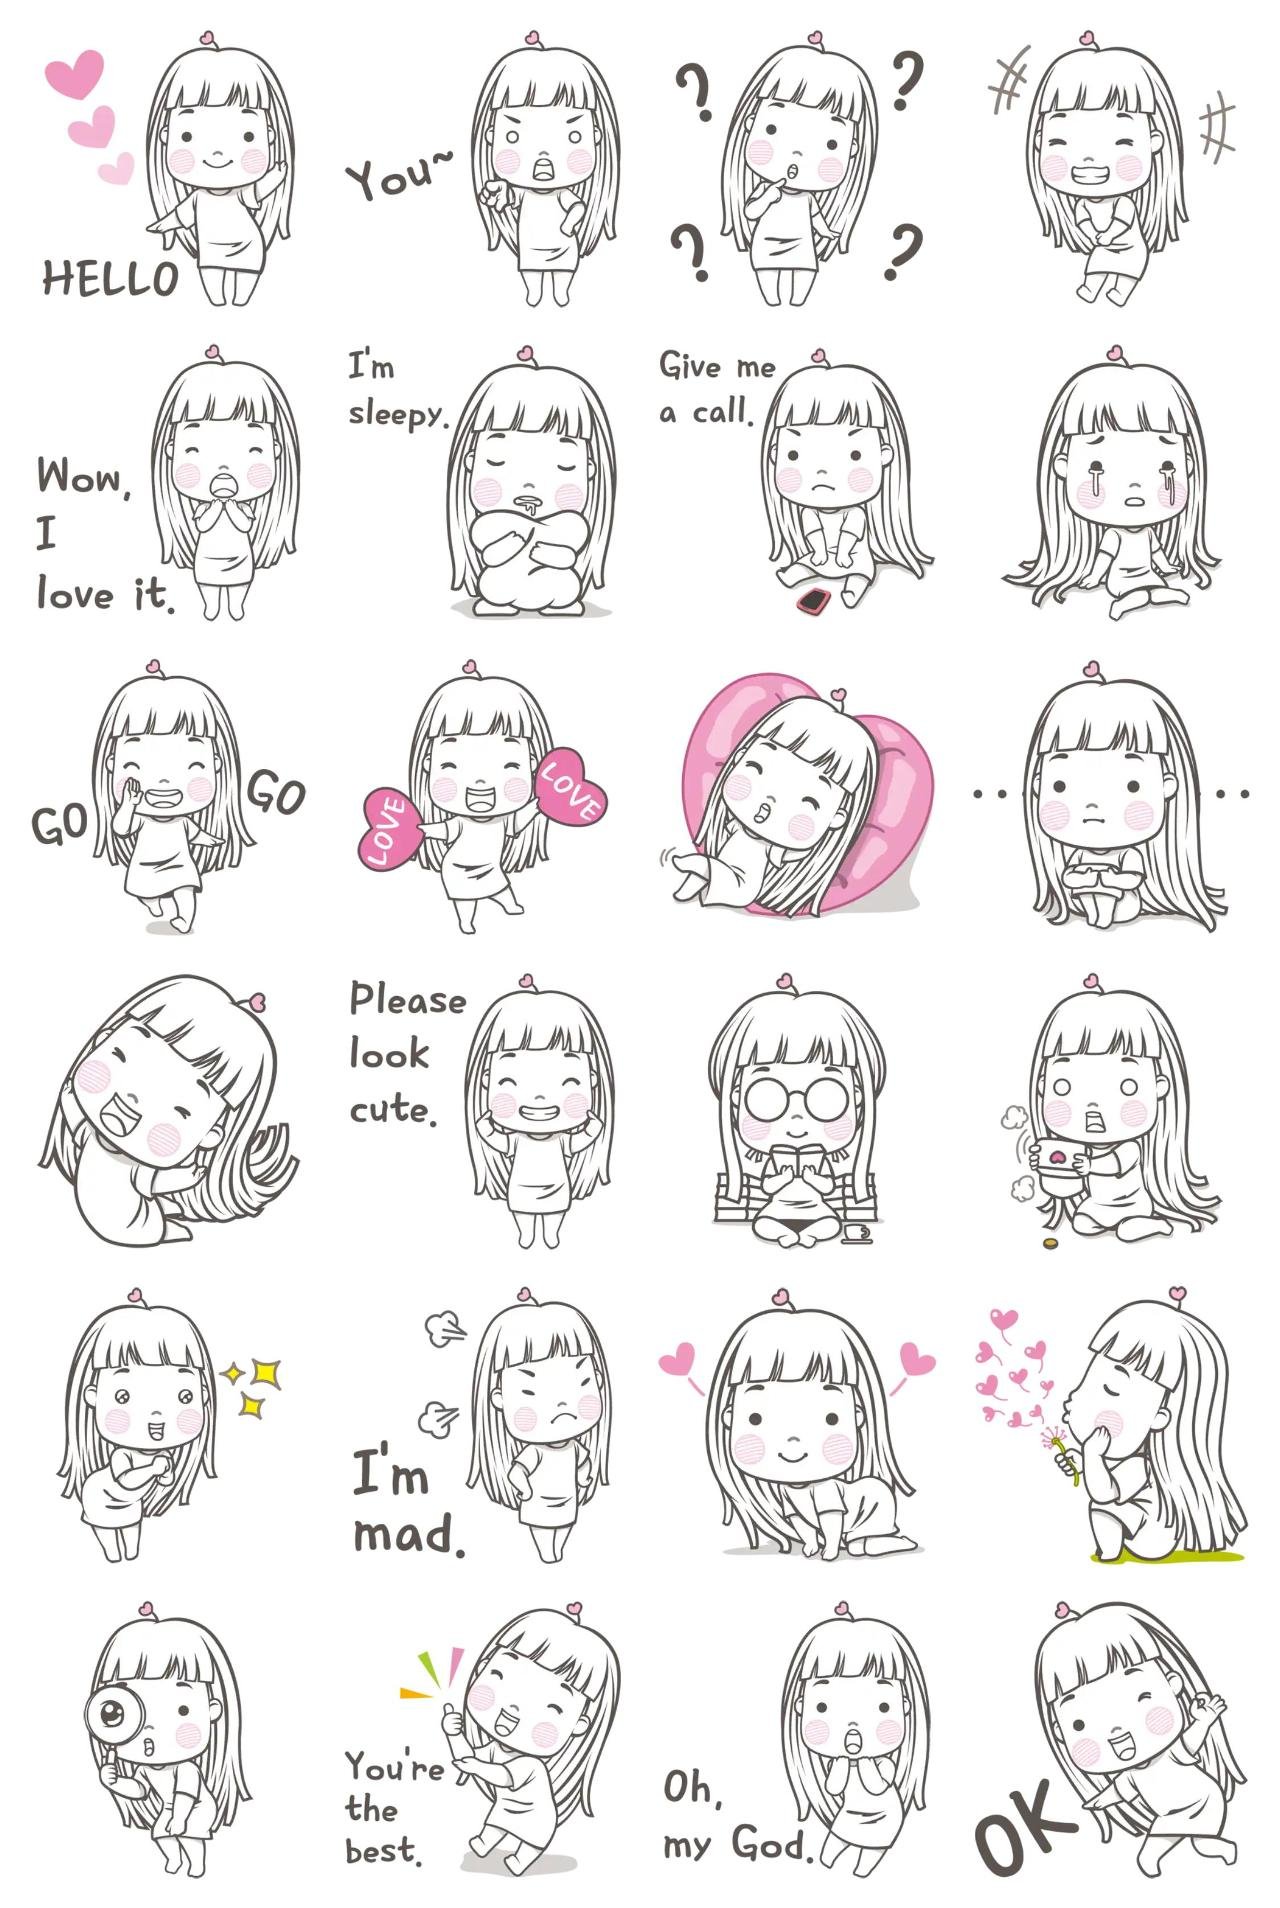 Emotional girl Miru People,Romance sticker pack for Whatsapp, Telegram, Signal, and others chatting and message apps